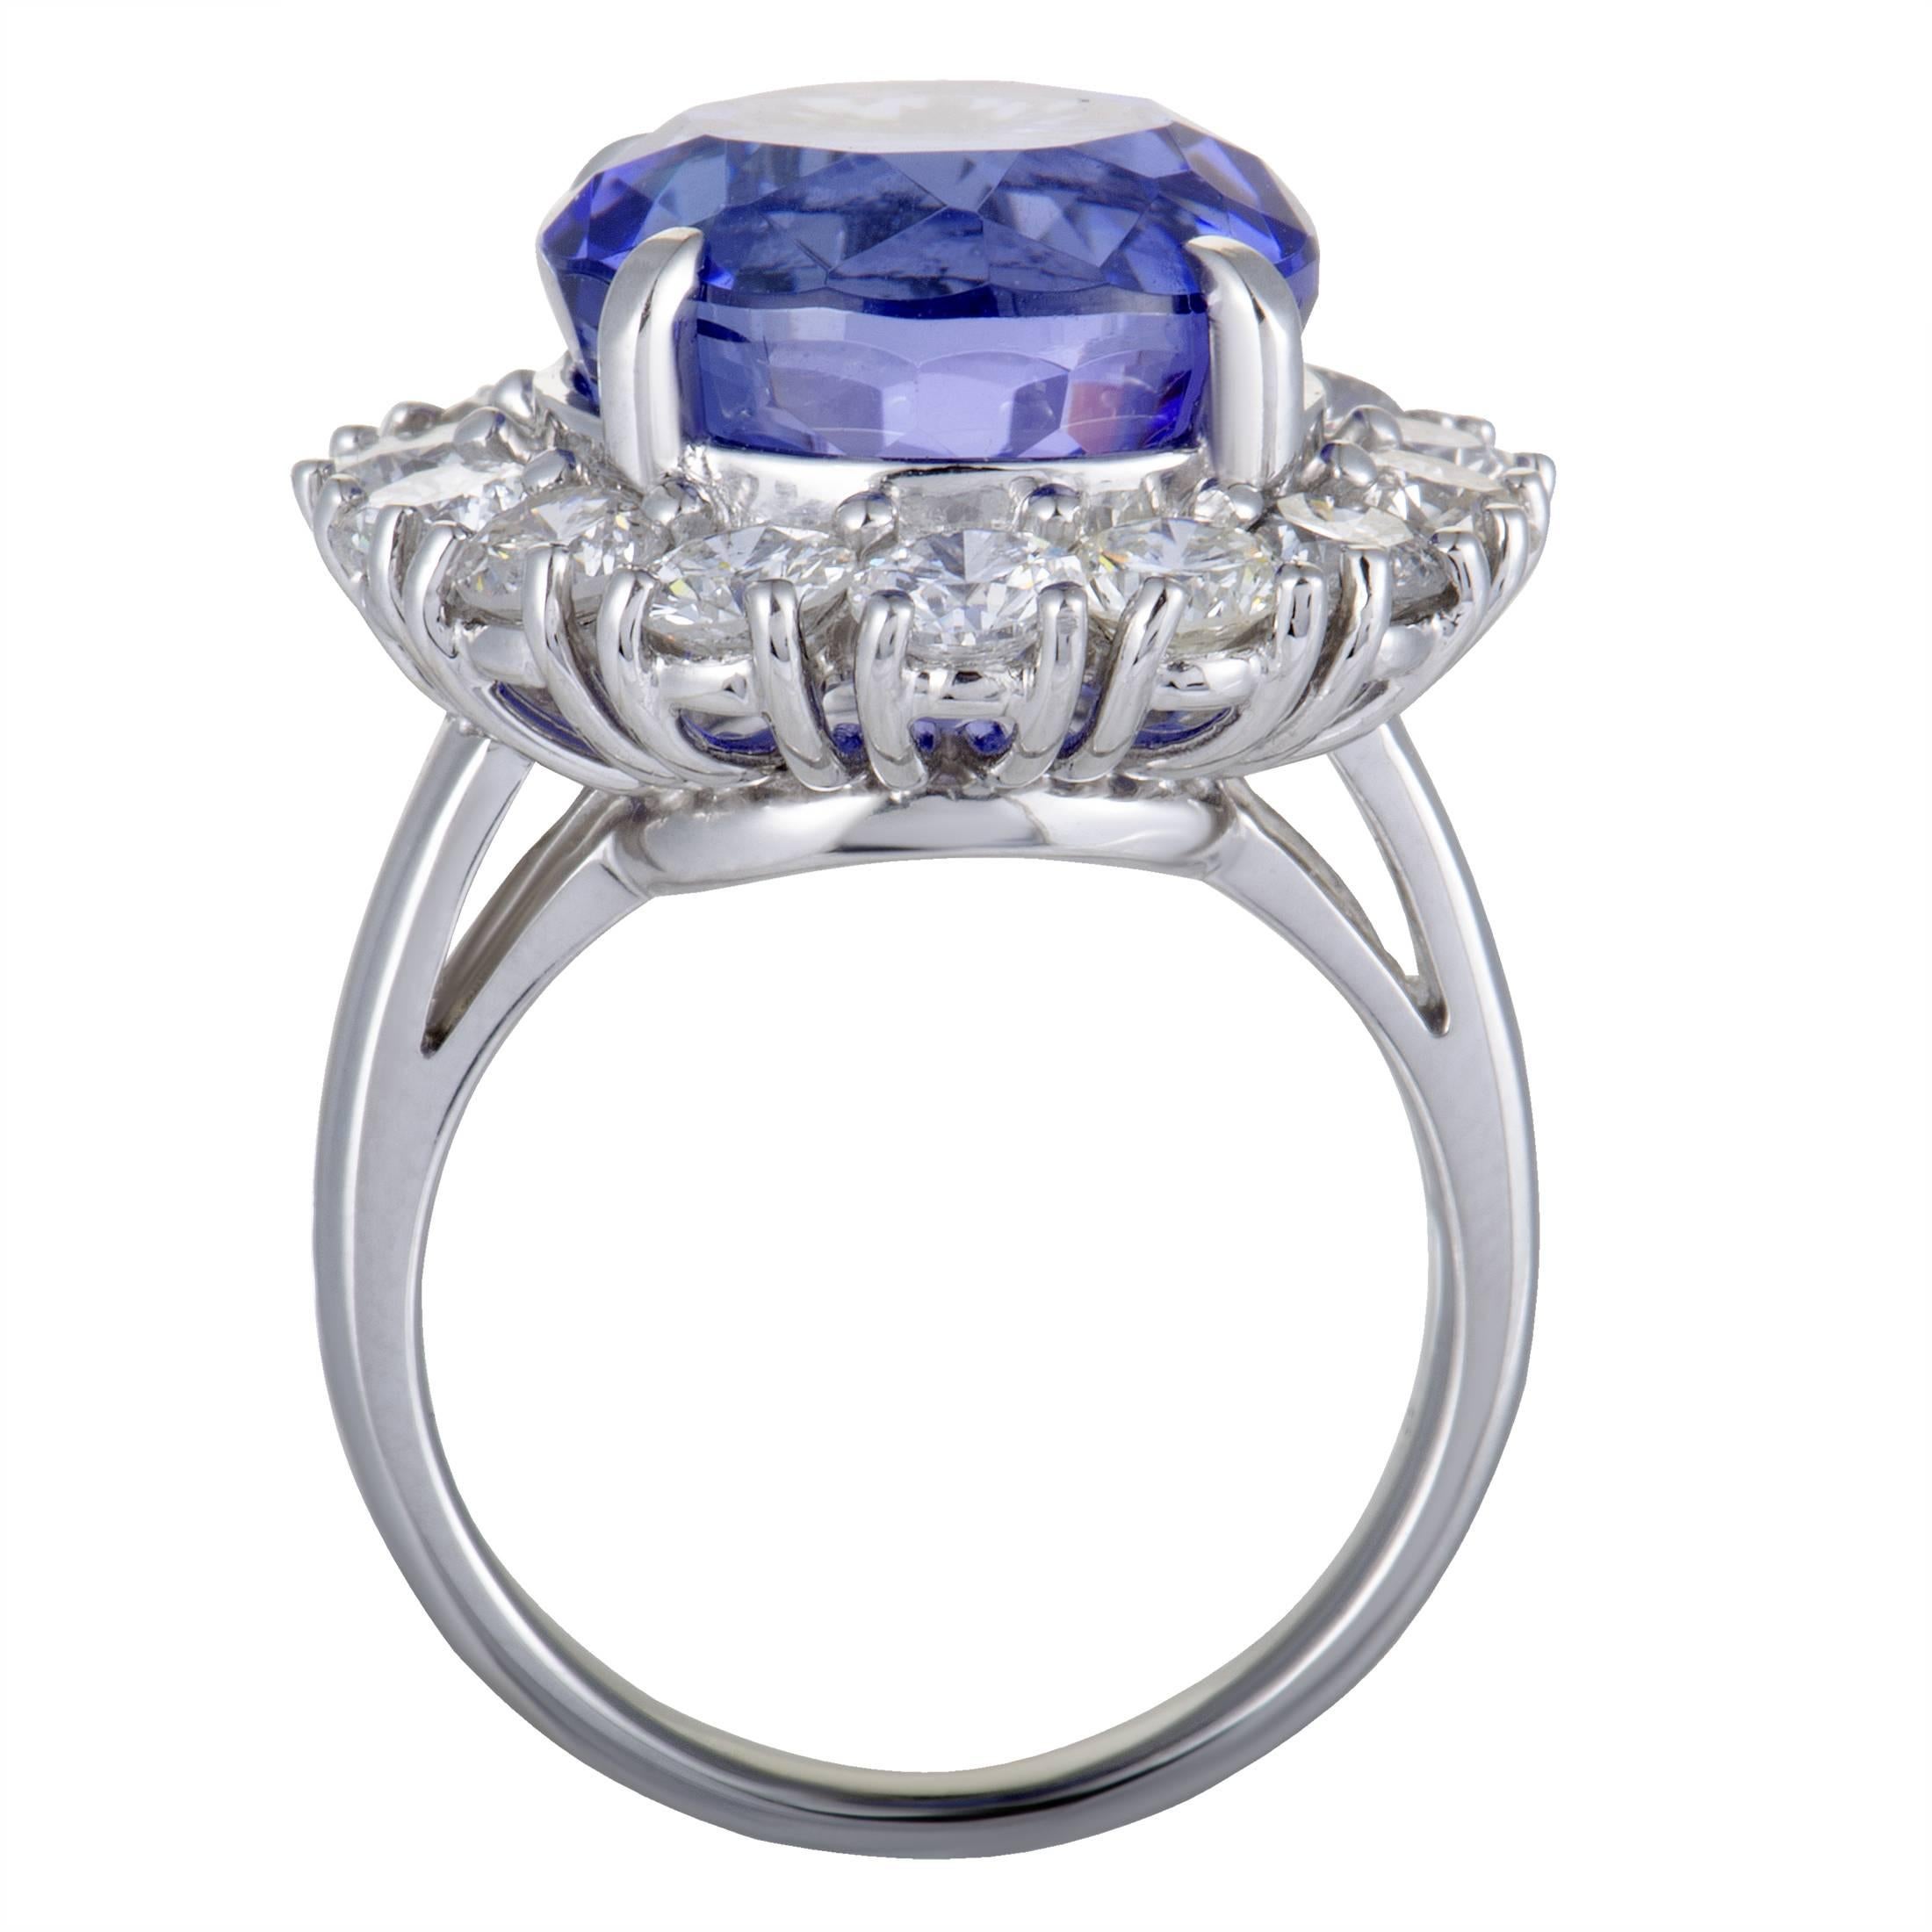 This stunning ring is made of prestigious platinum and set with the ever-compelling blend of resplendent diamonds and striking tanzanite, boasting an exceptionally refined appeal. The tanzanite weighs 12.50 carats and the diamonds total 3.12